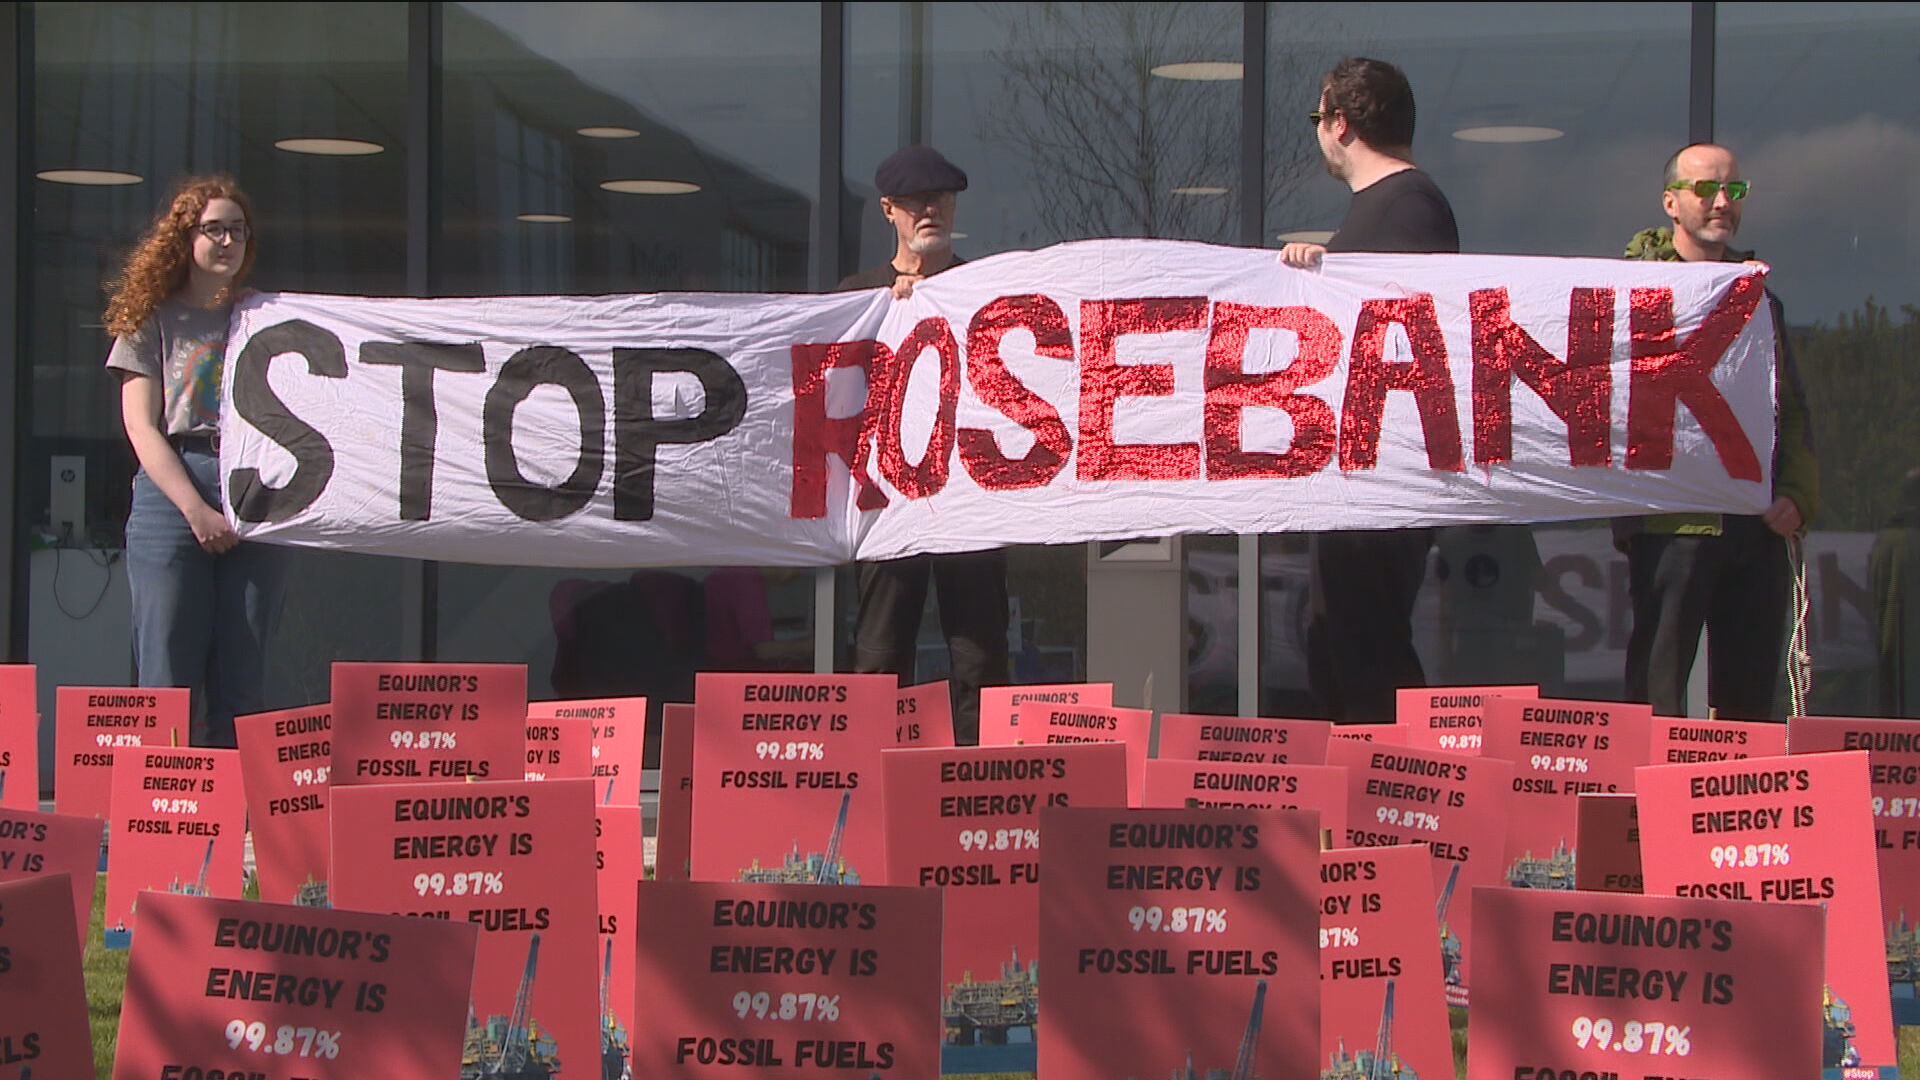 Rishi Sunak supported the approval of the Rosebank oil field, which campaigners say will emit as much CO2 as the bottom 27 low-income countries in the world.